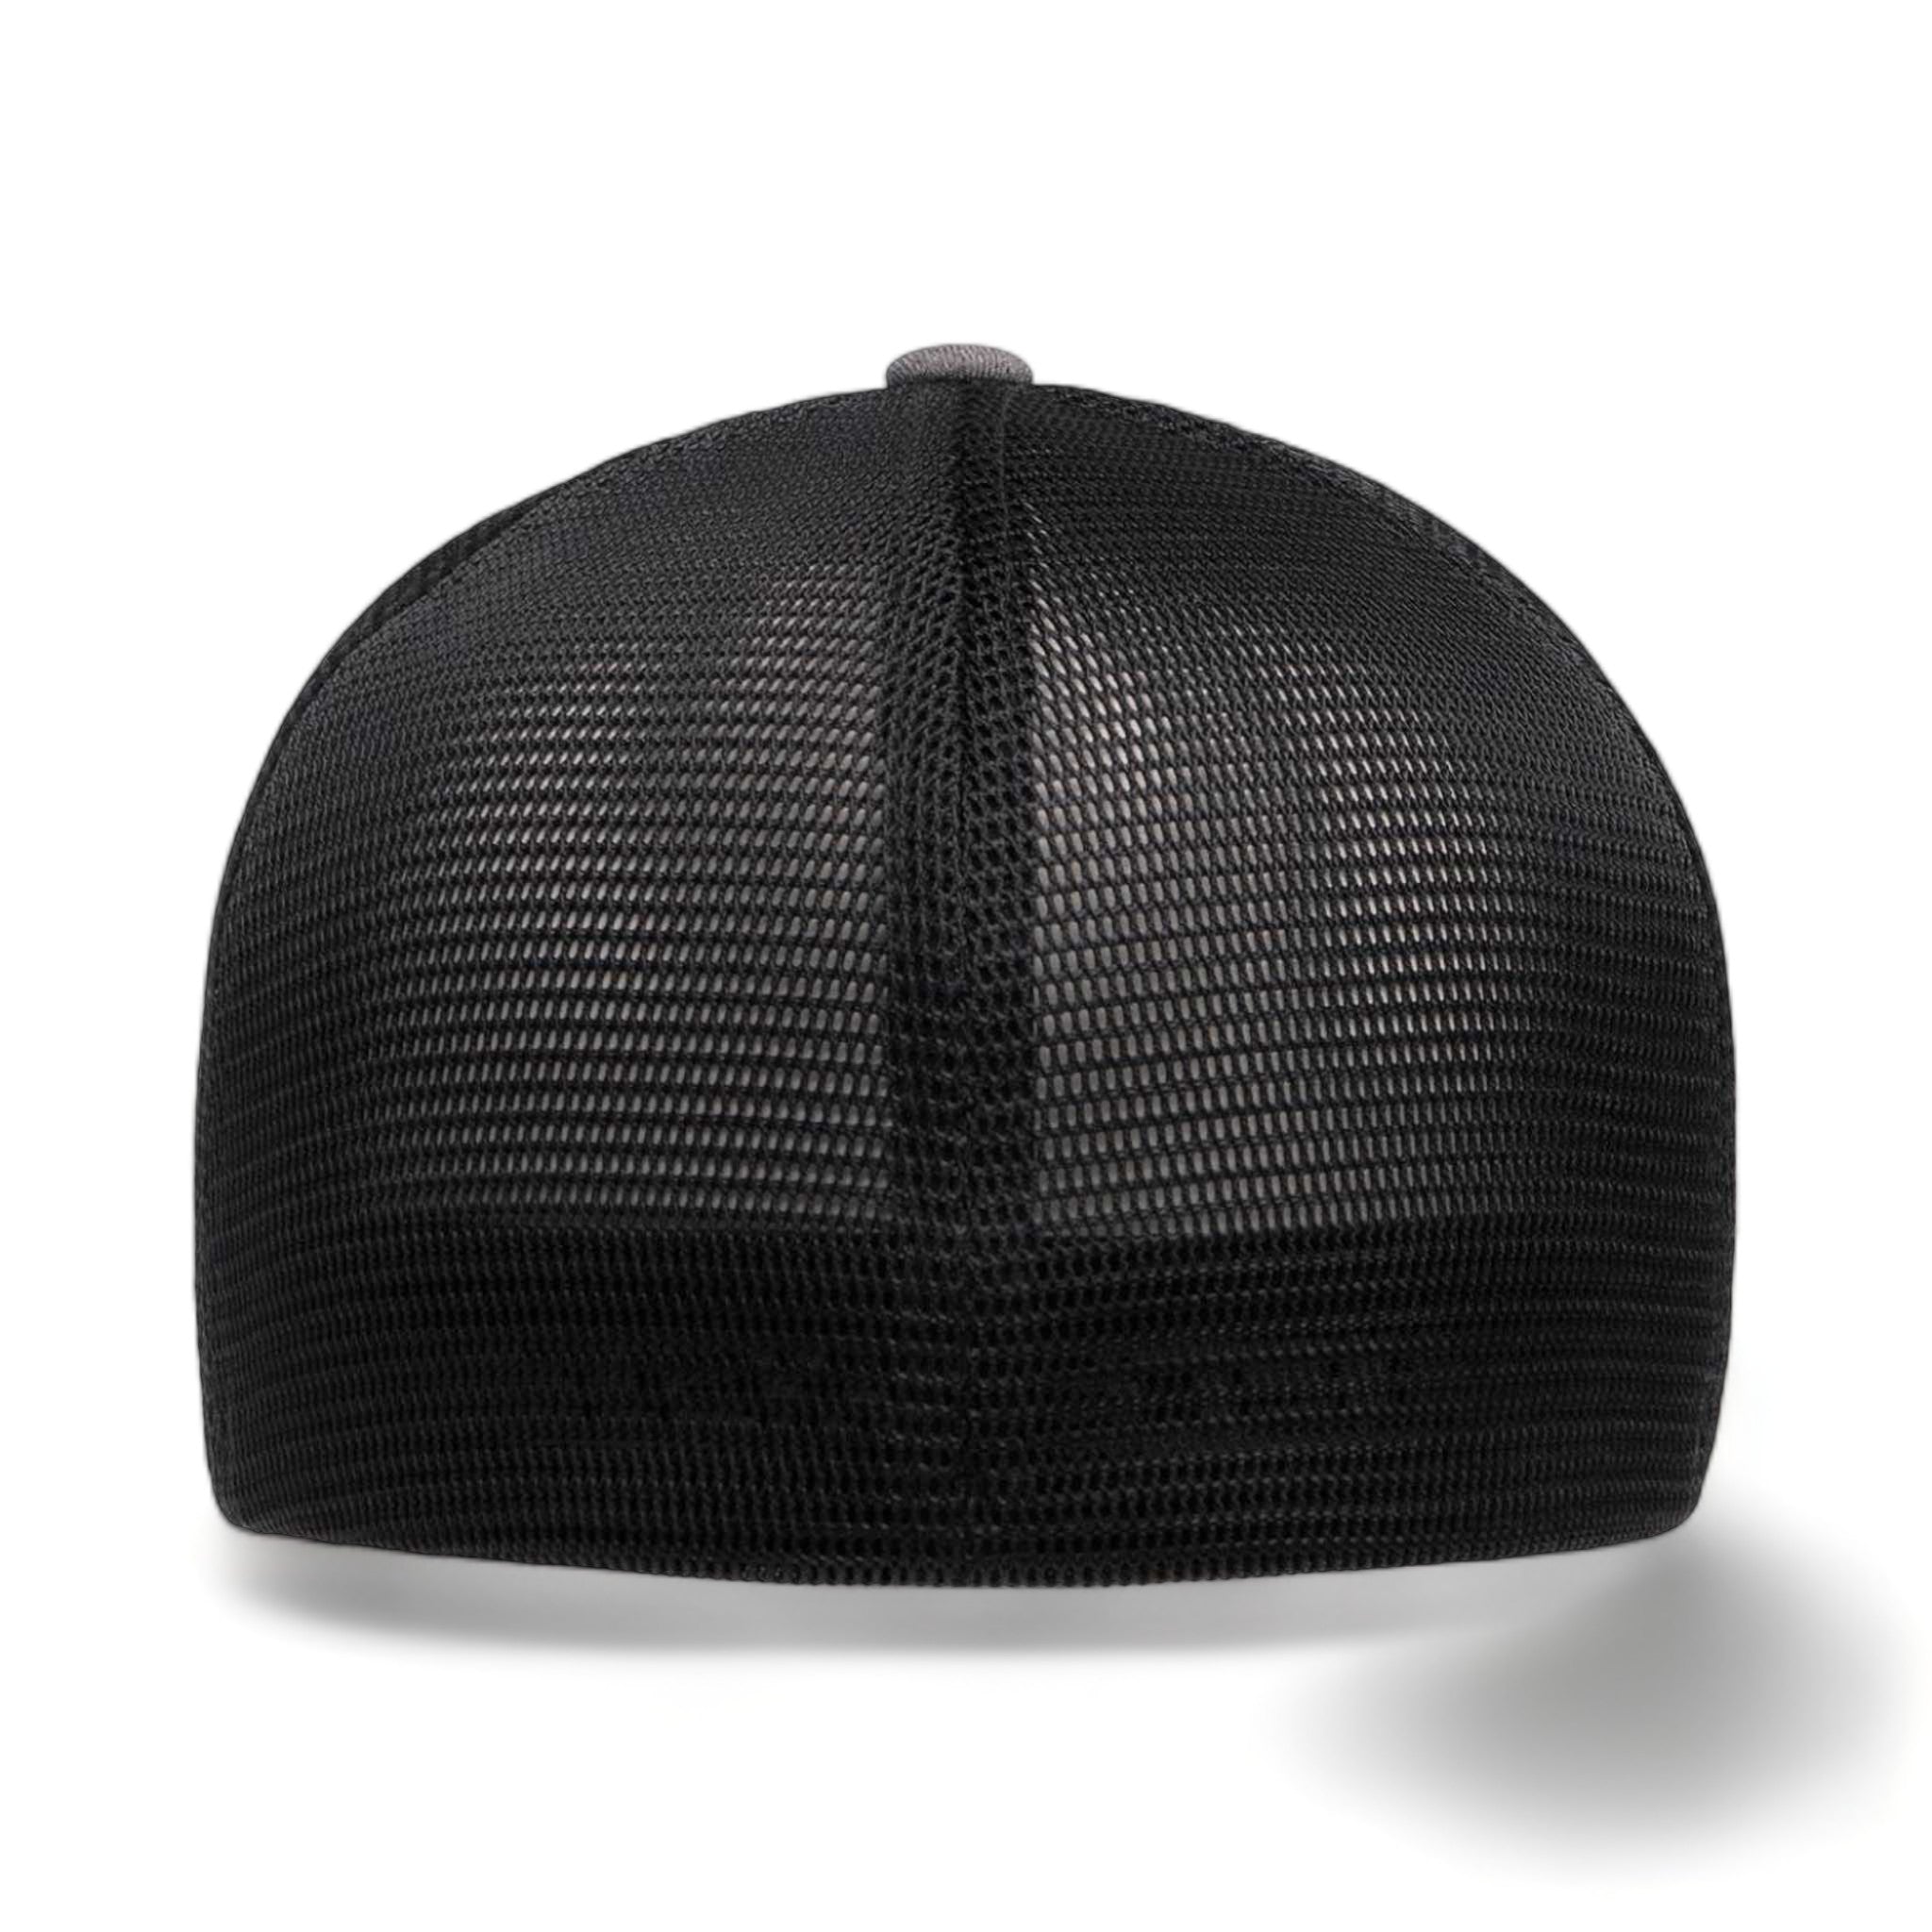 Back view of Flexfit 5511UP custom hat in mélange heather and black